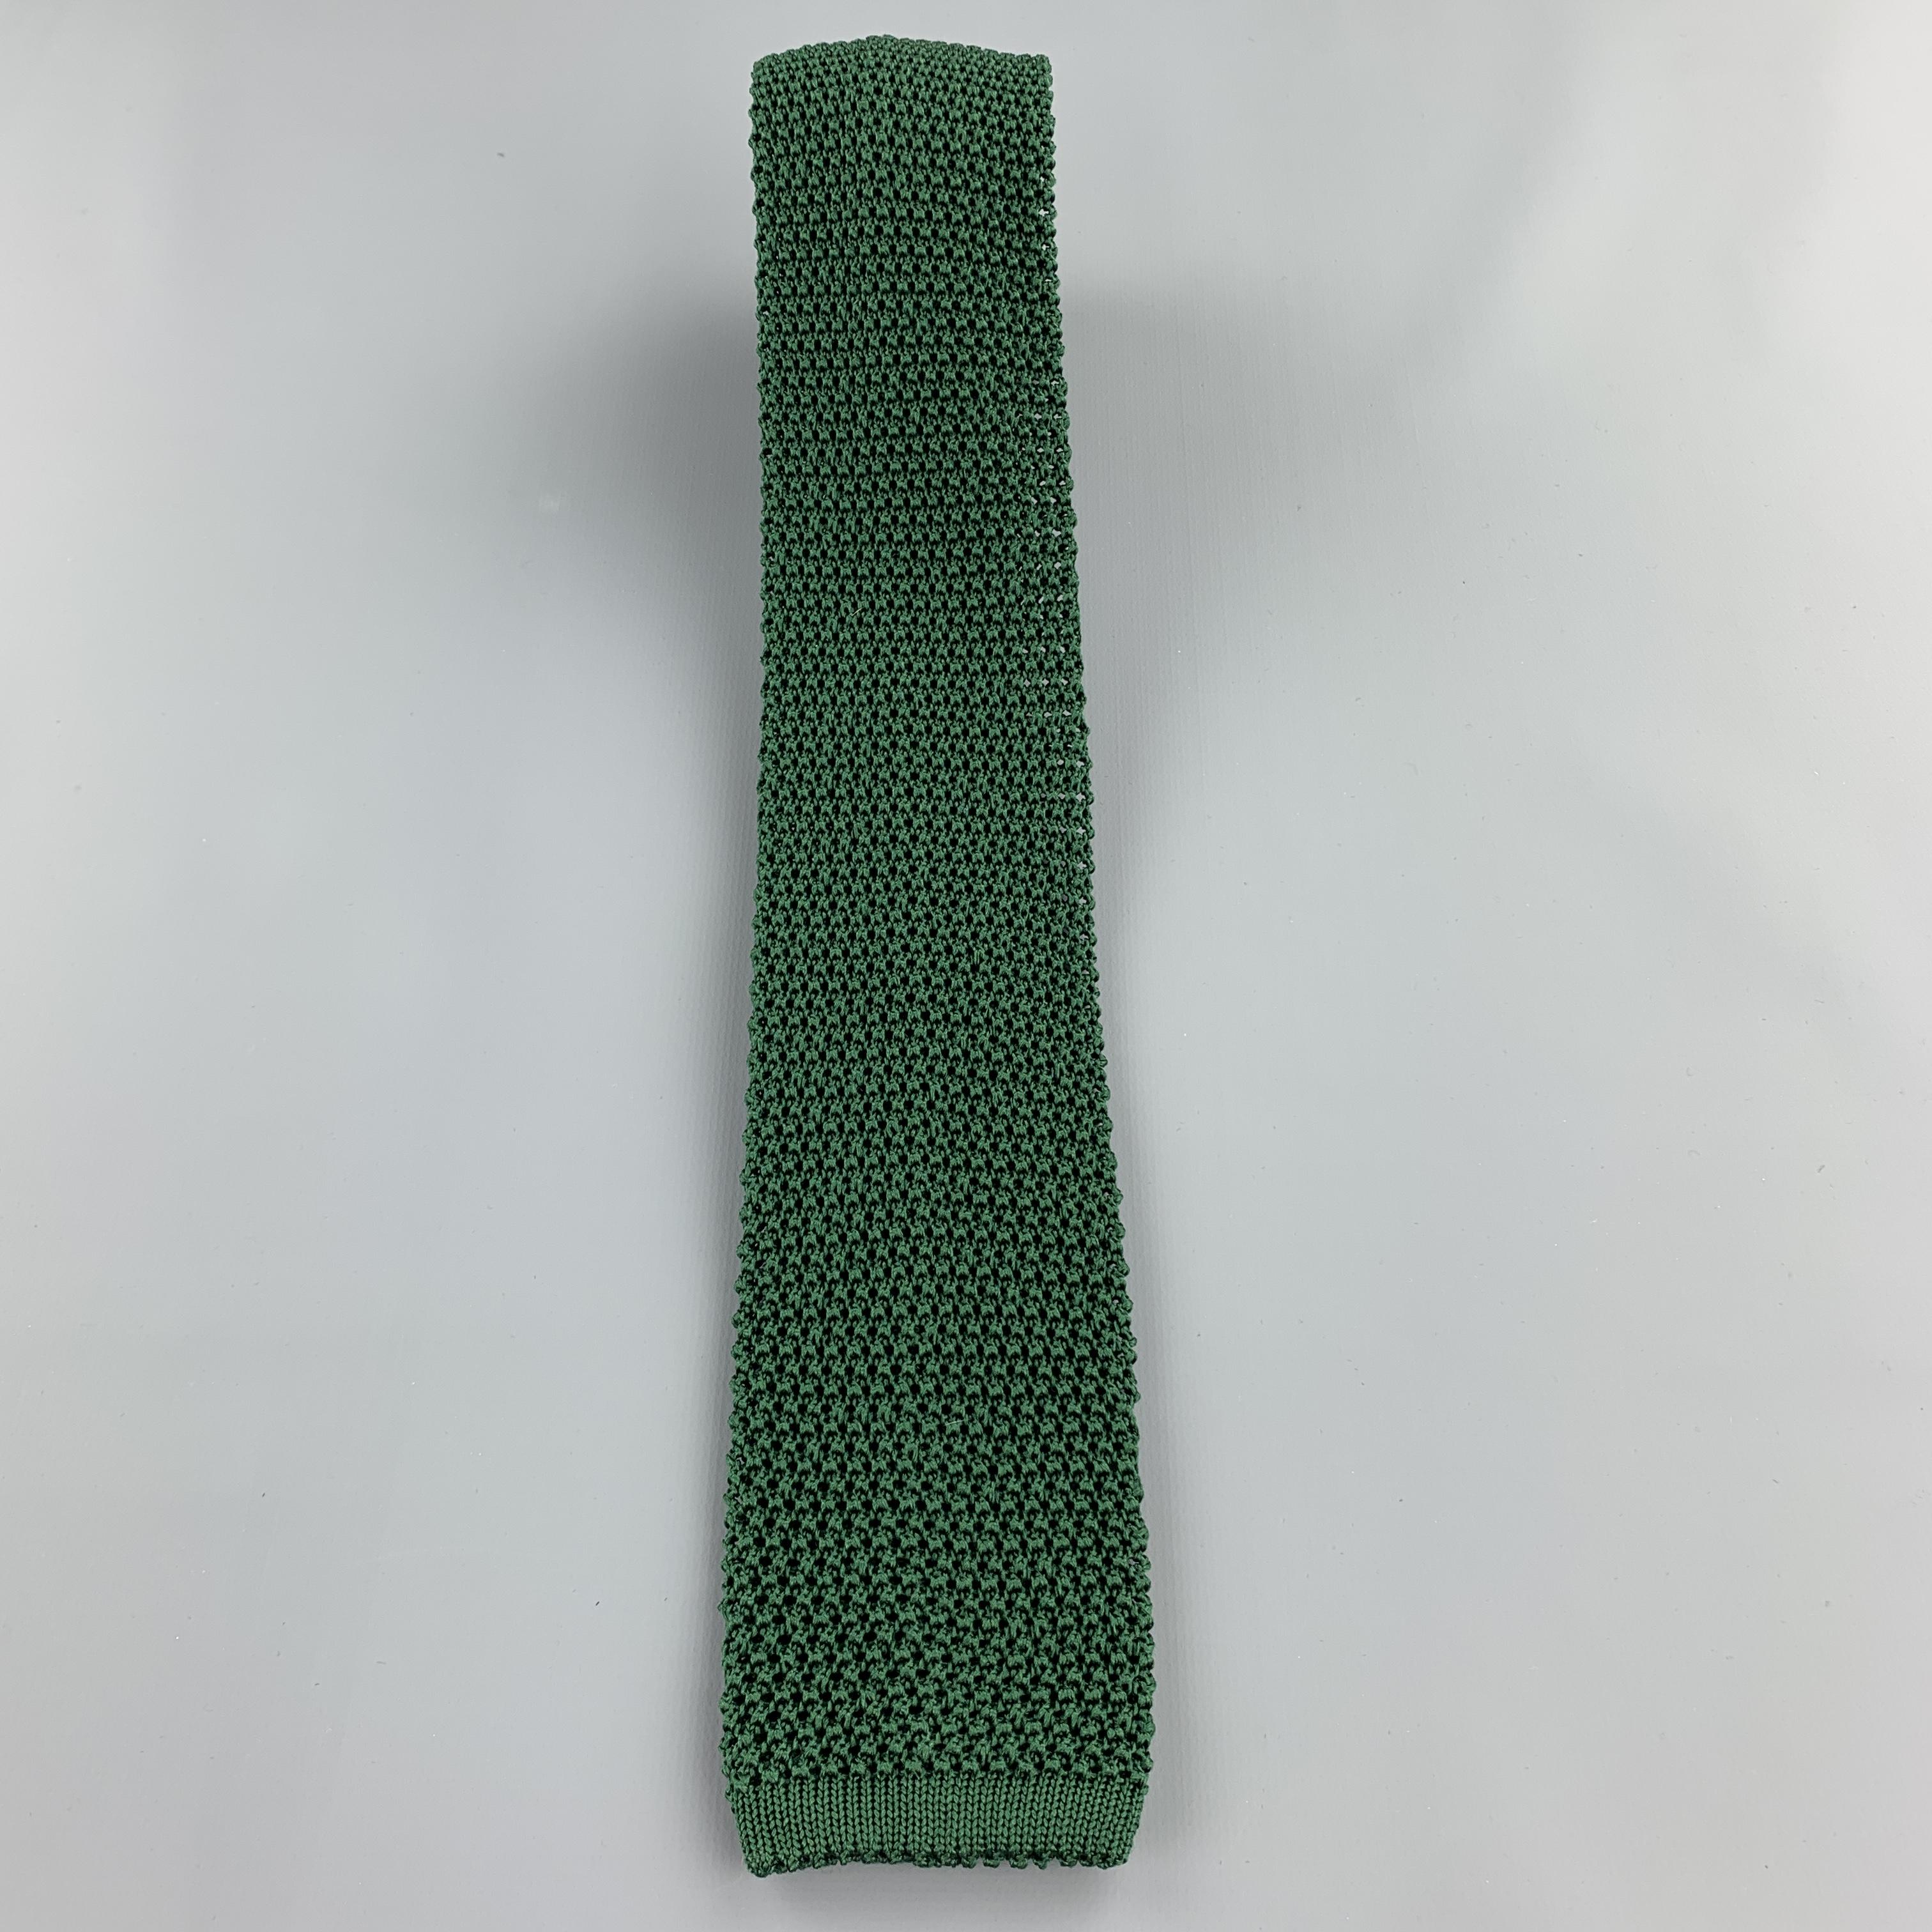 PAUL STUART necktie comes in a forest green knitted textured silk. Made in Italy. 

Excellent Pre-Owned Condition.

Width: 2.7 in. 